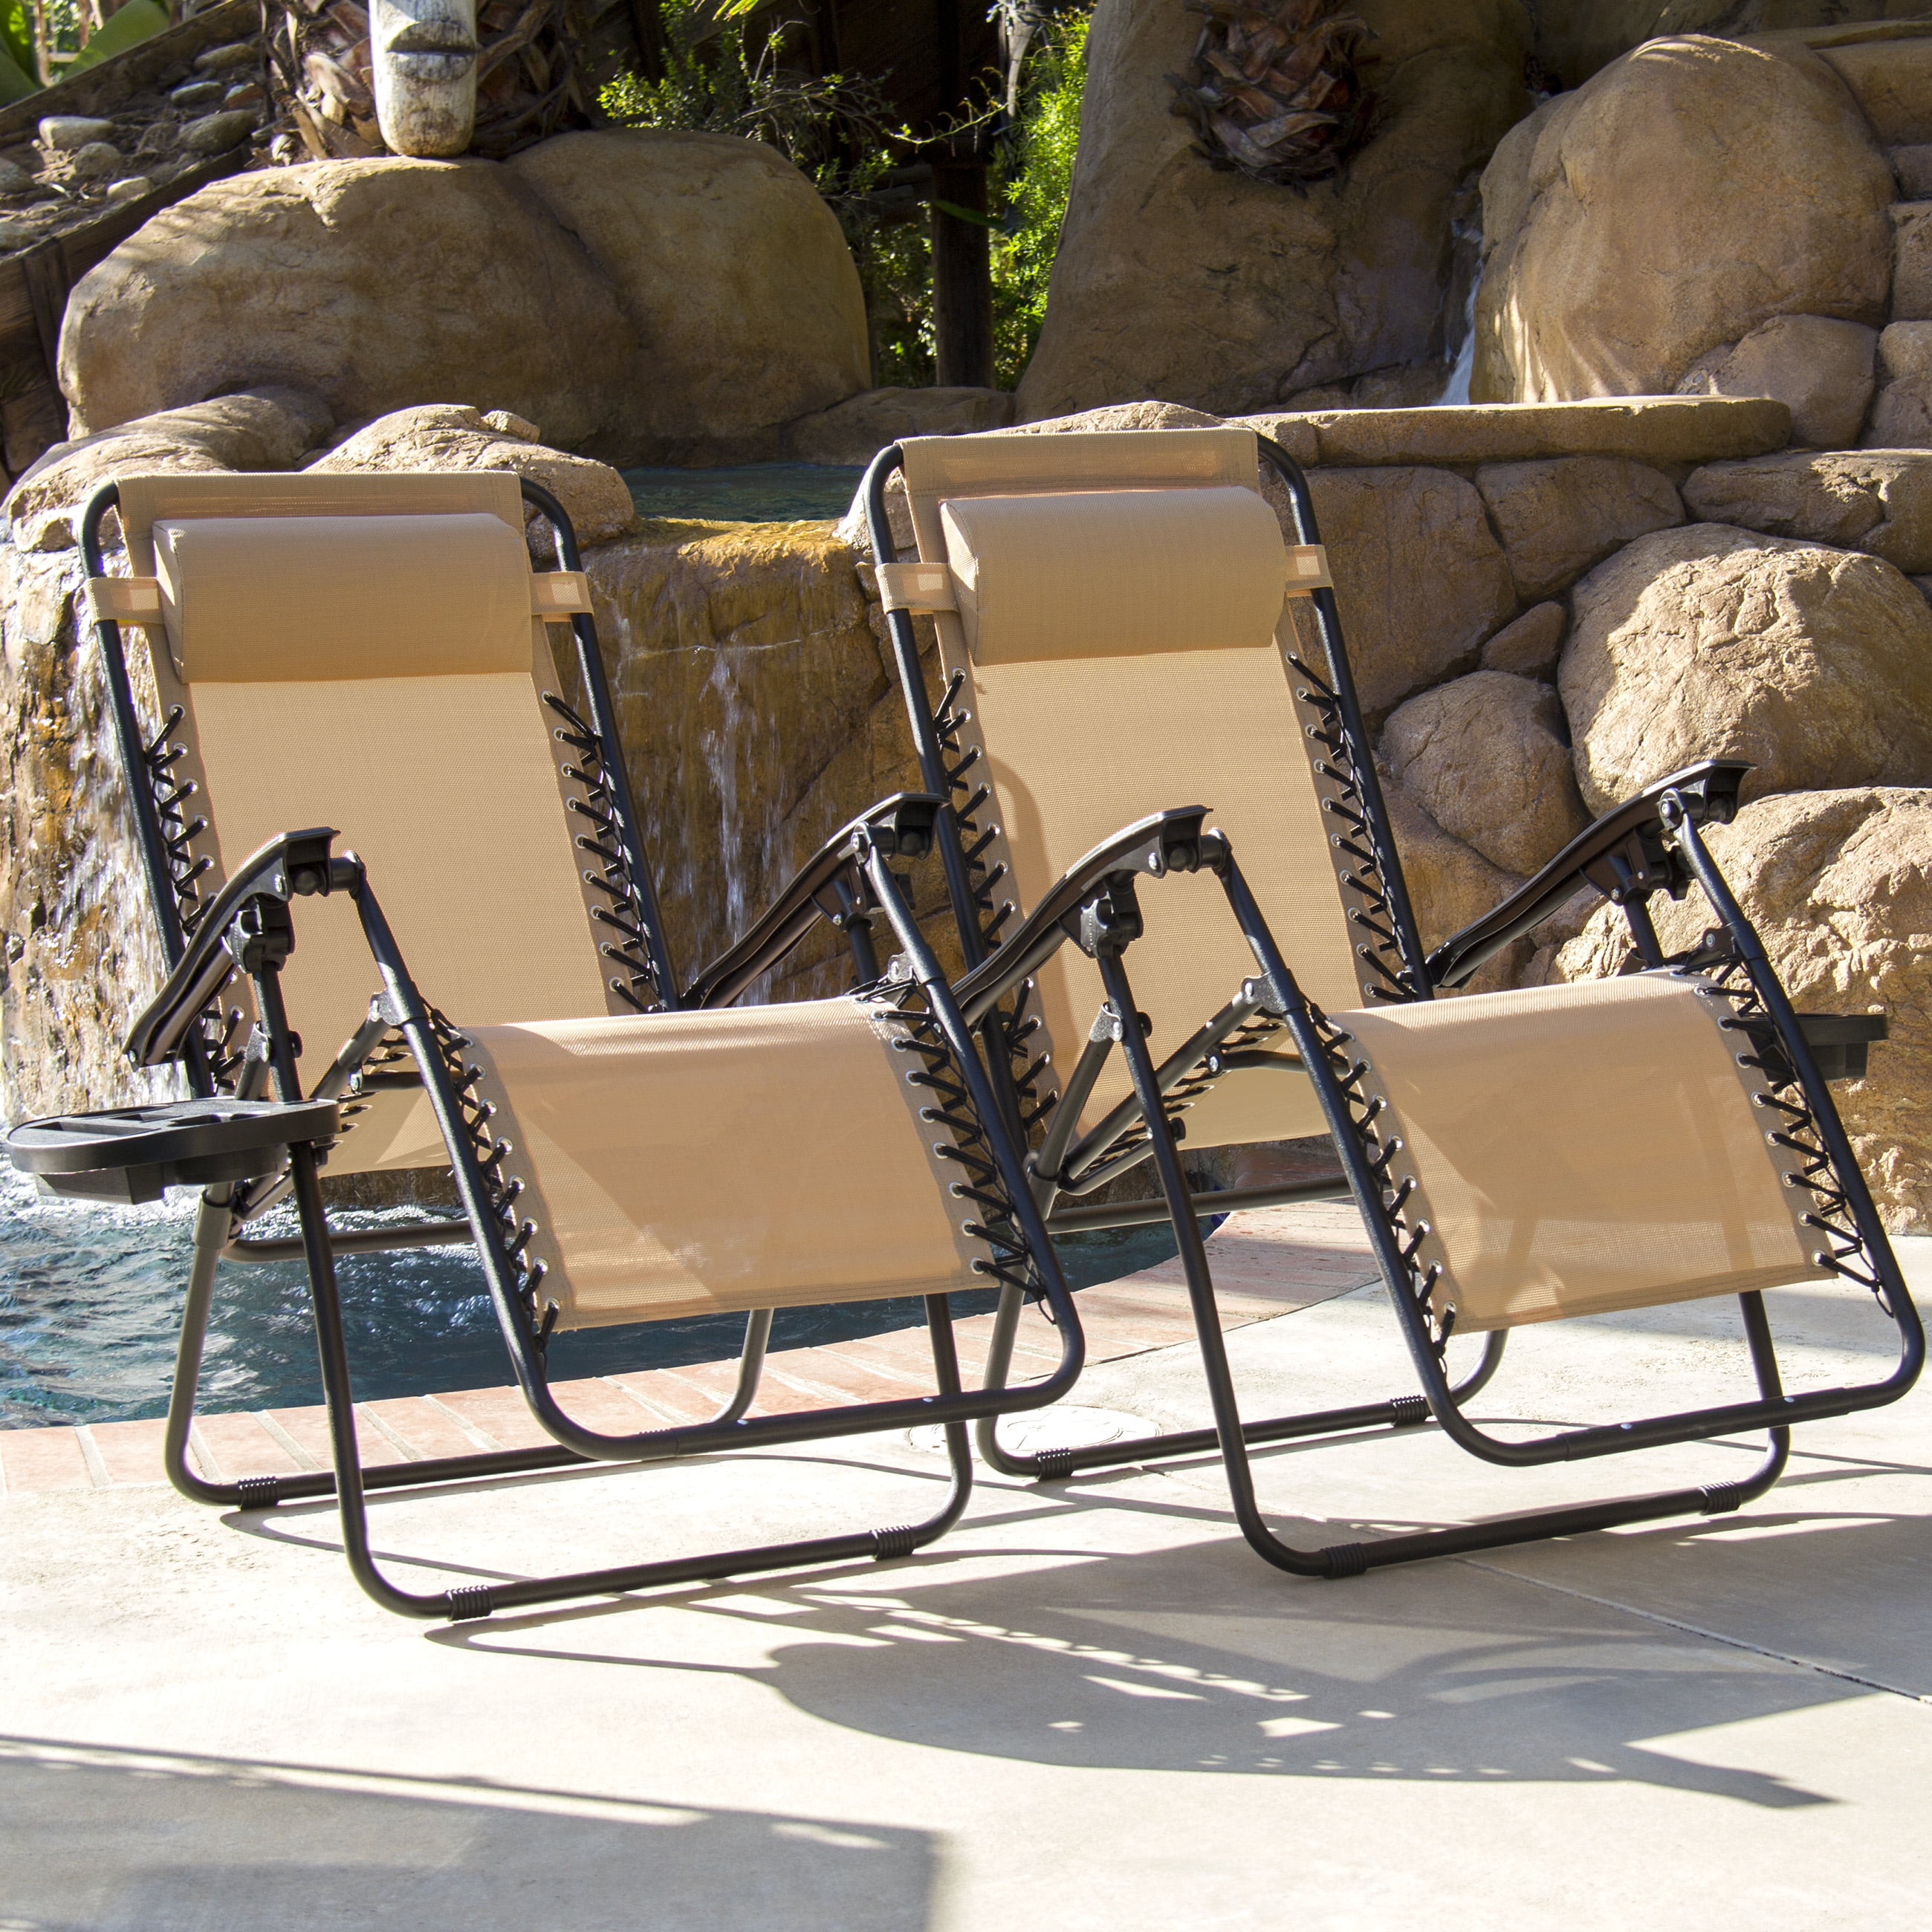 Gray Details about   Zero Gravity Case Lounge Patio Chairs Outdoor Yard Beach 